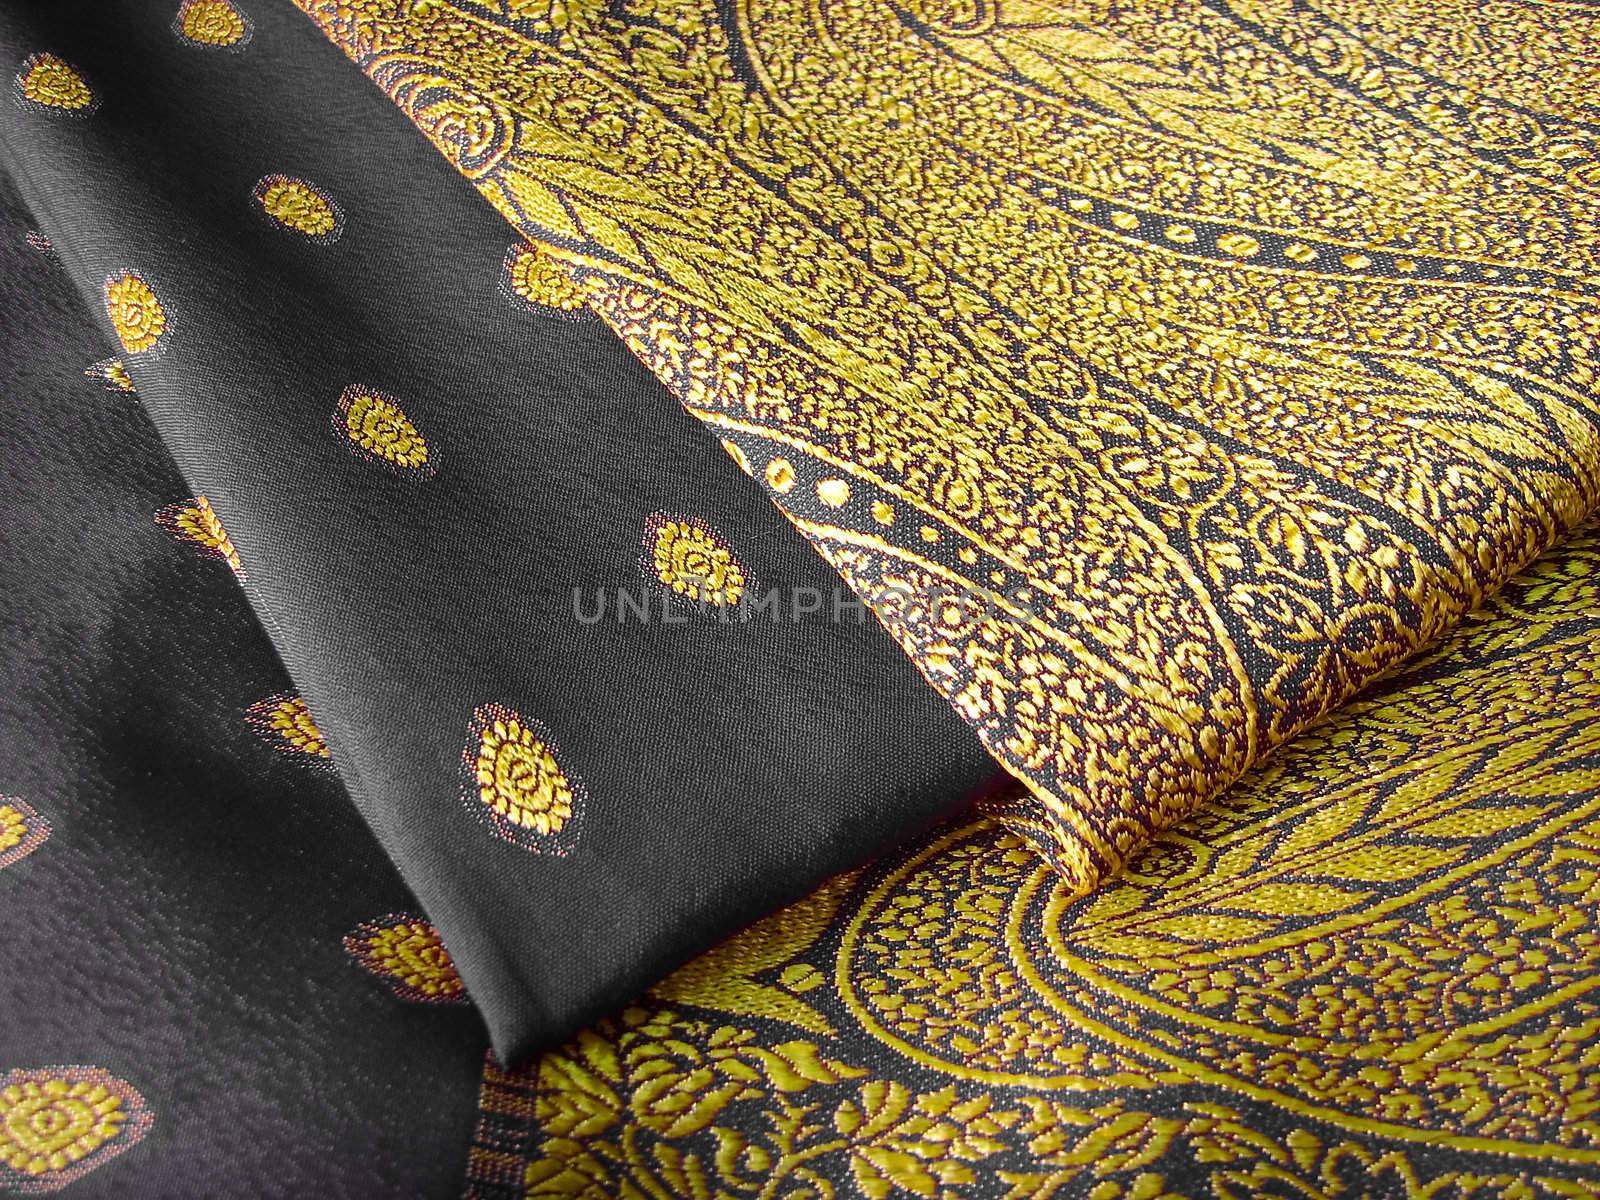 A folded black and yellow saree with floral designs